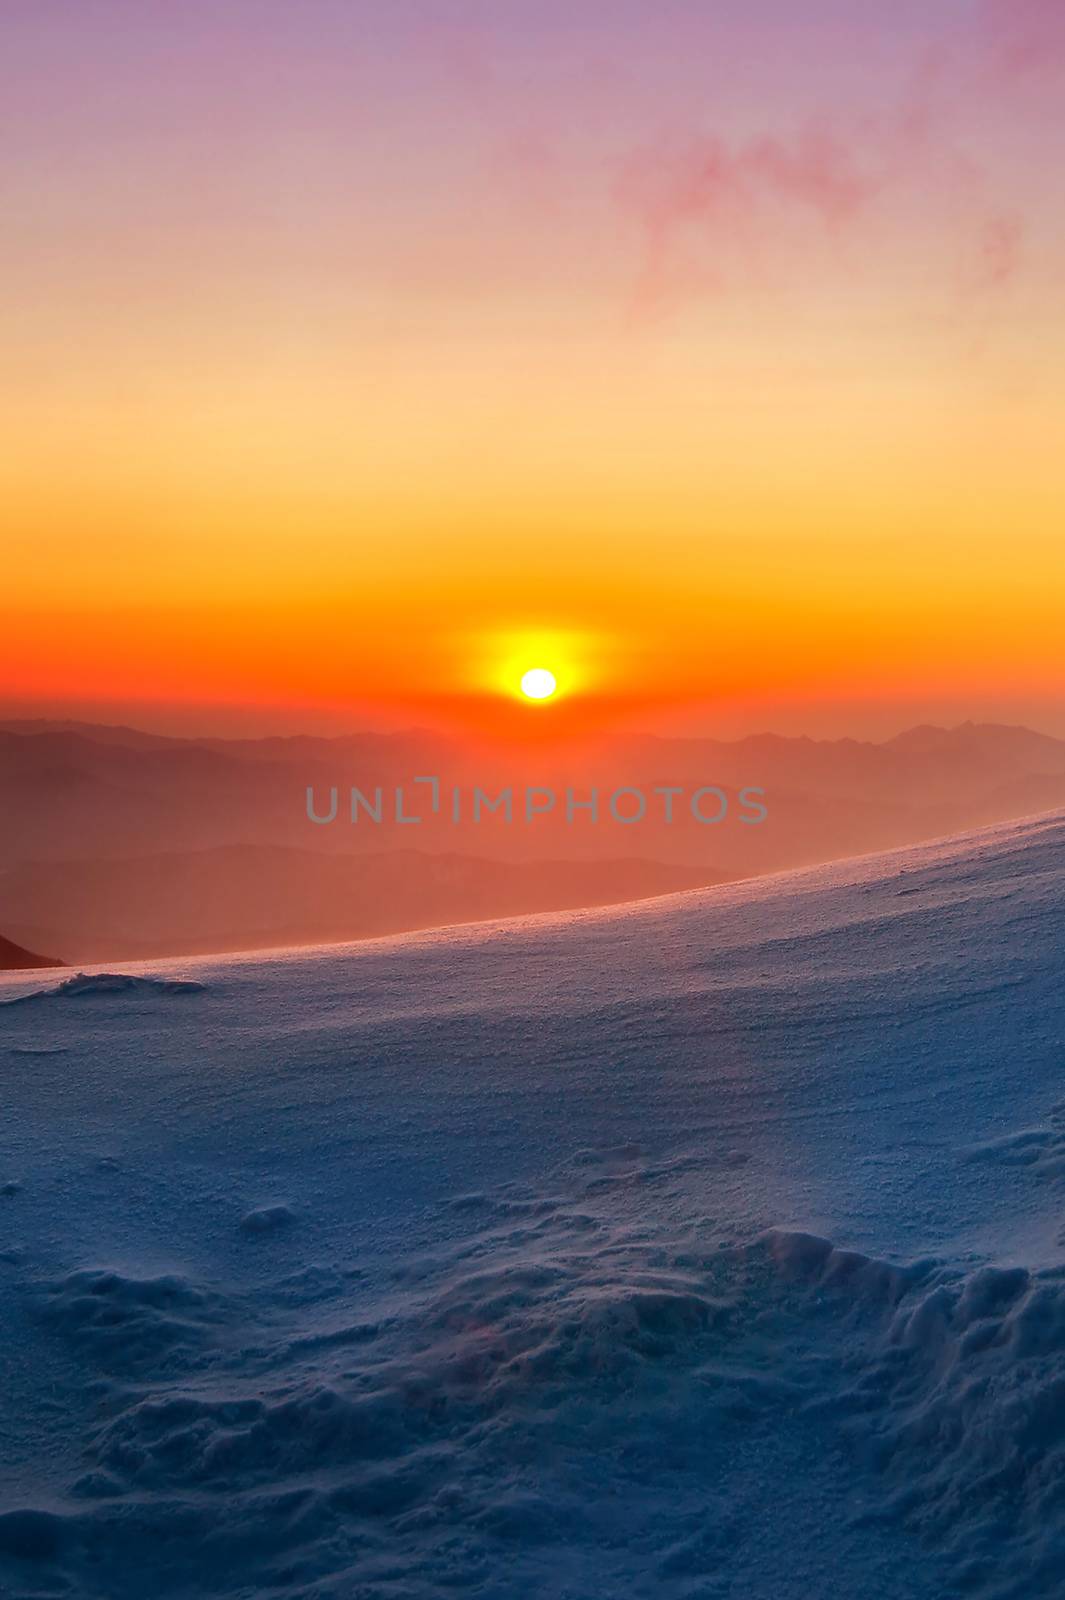 Sunrise on Deogyusan mountains covered with snow in winter,South Korea. by gutarphotoghaphy